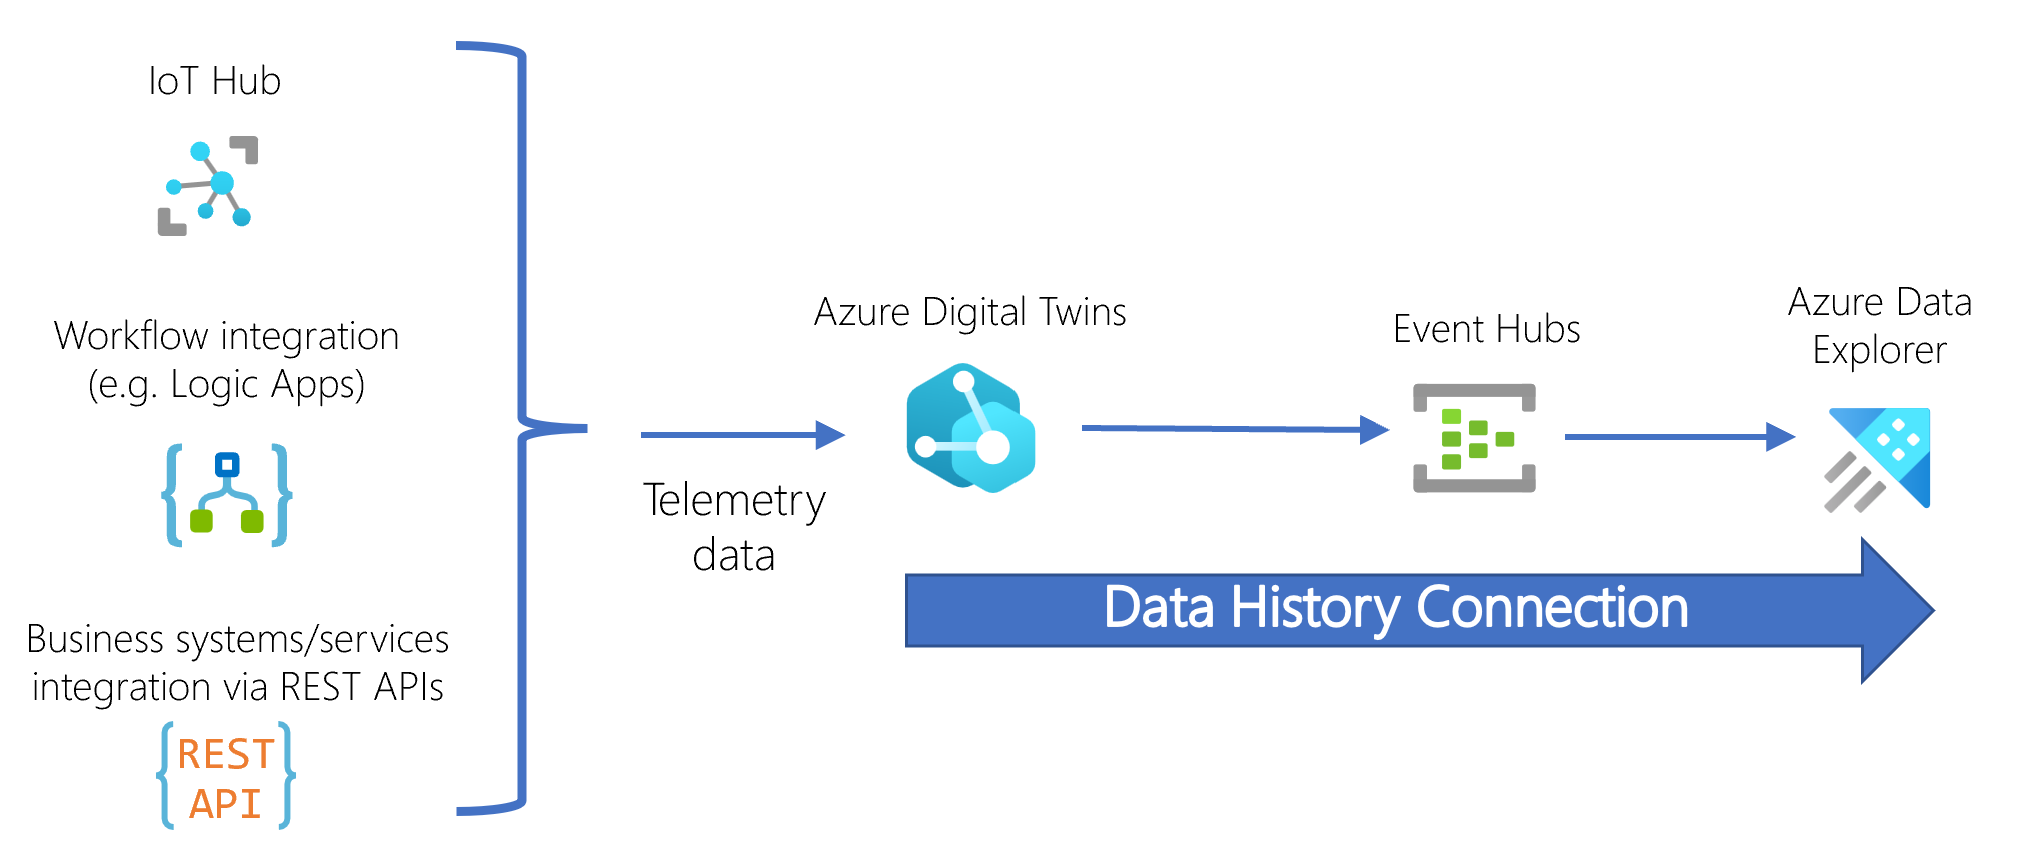 Diagram showing the flow of telemetry data into Azure Digital Twins, through an event hub, to Azure Data Explorer.